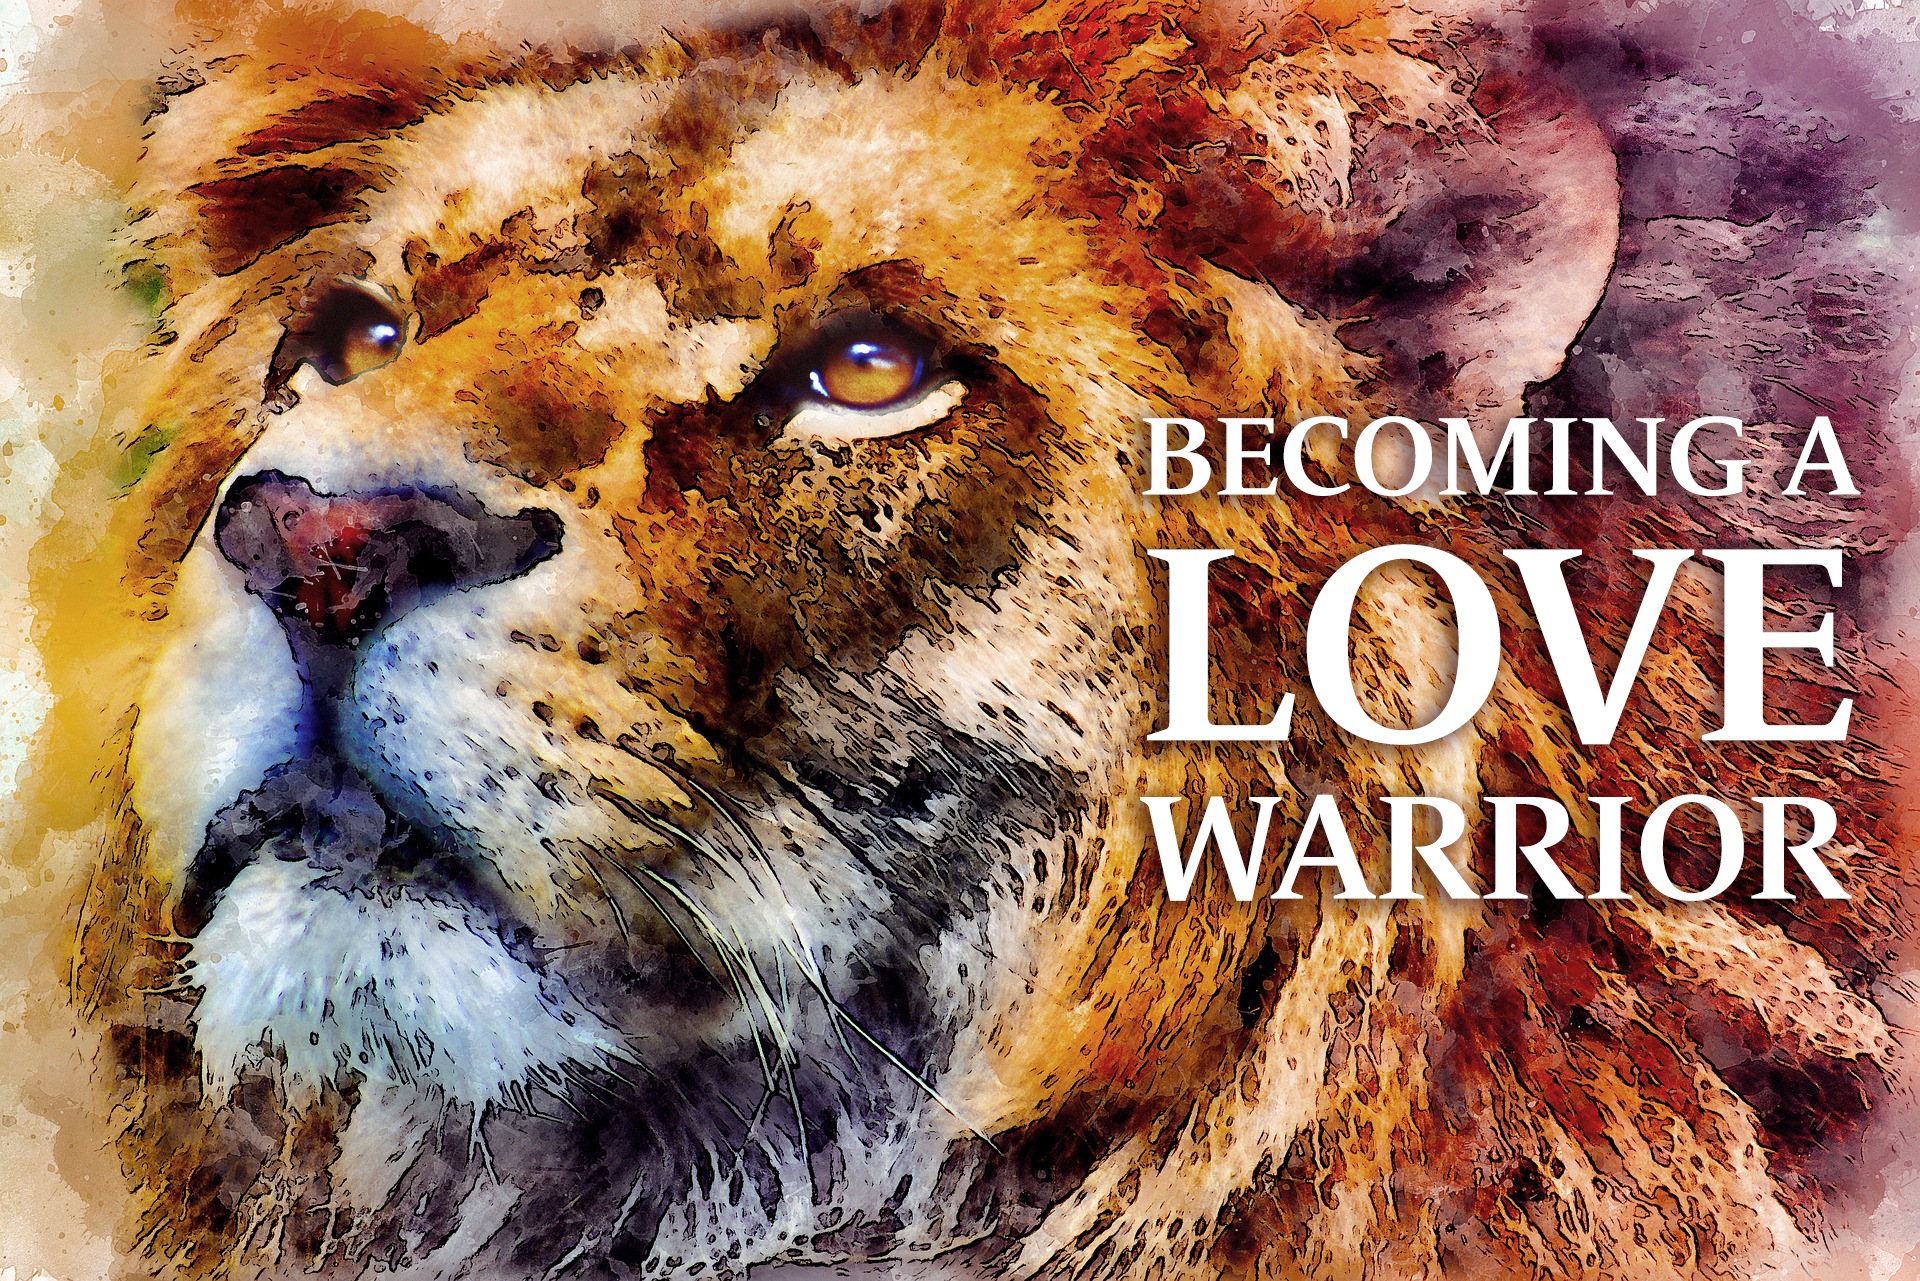 Becoming a Love Warrior Lesson I: Facing the Truth of our Reality. A Jungian perspective on the meaning of love in these challenging times.